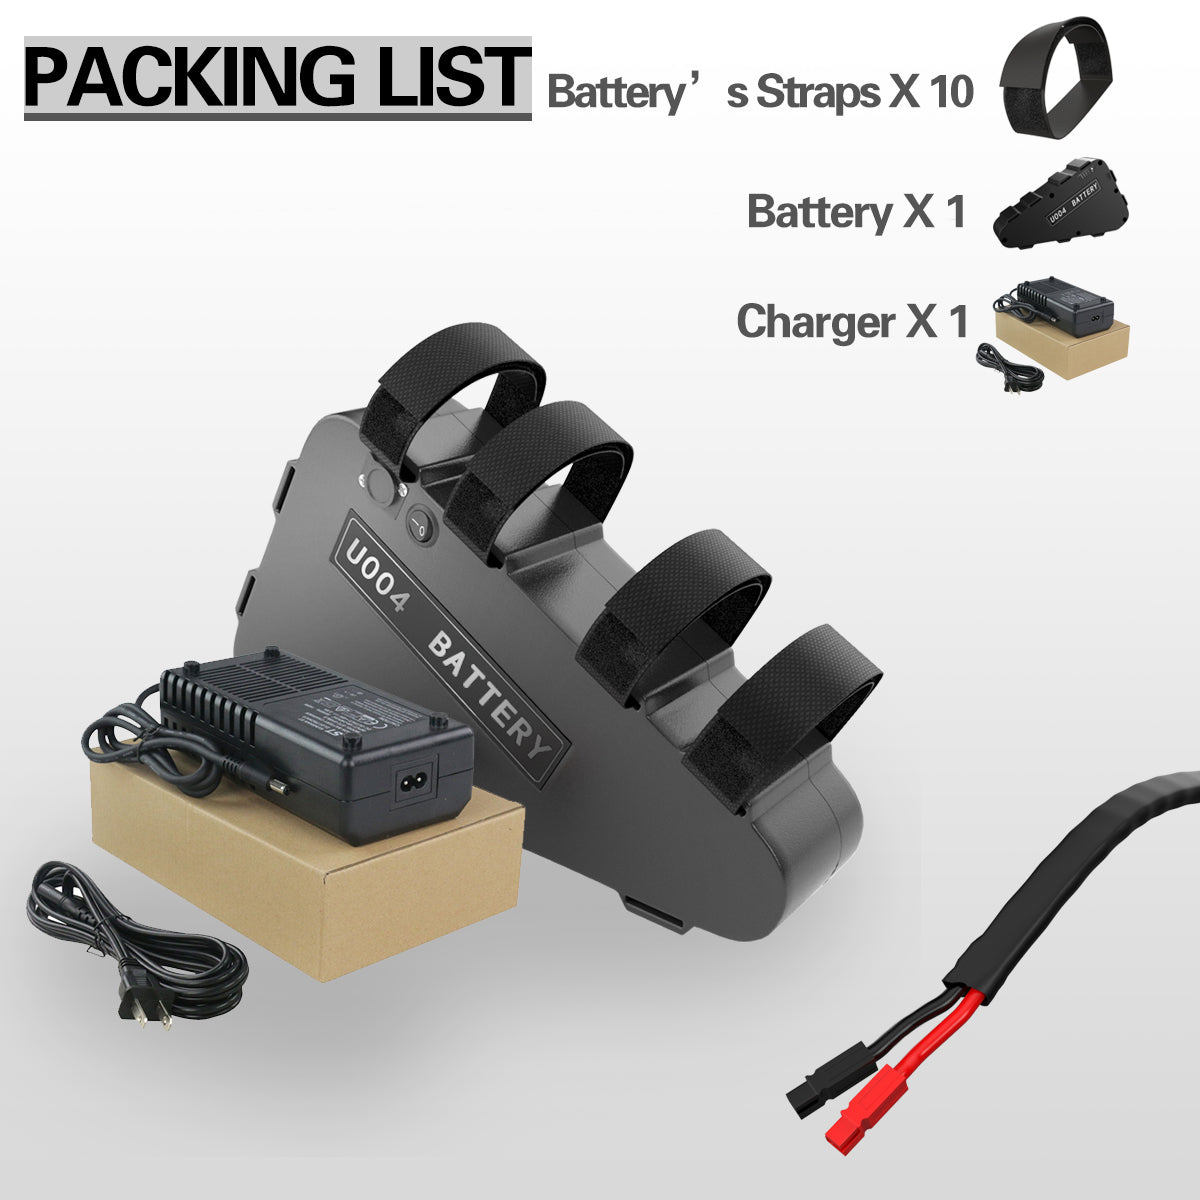 Triangle battery packing list